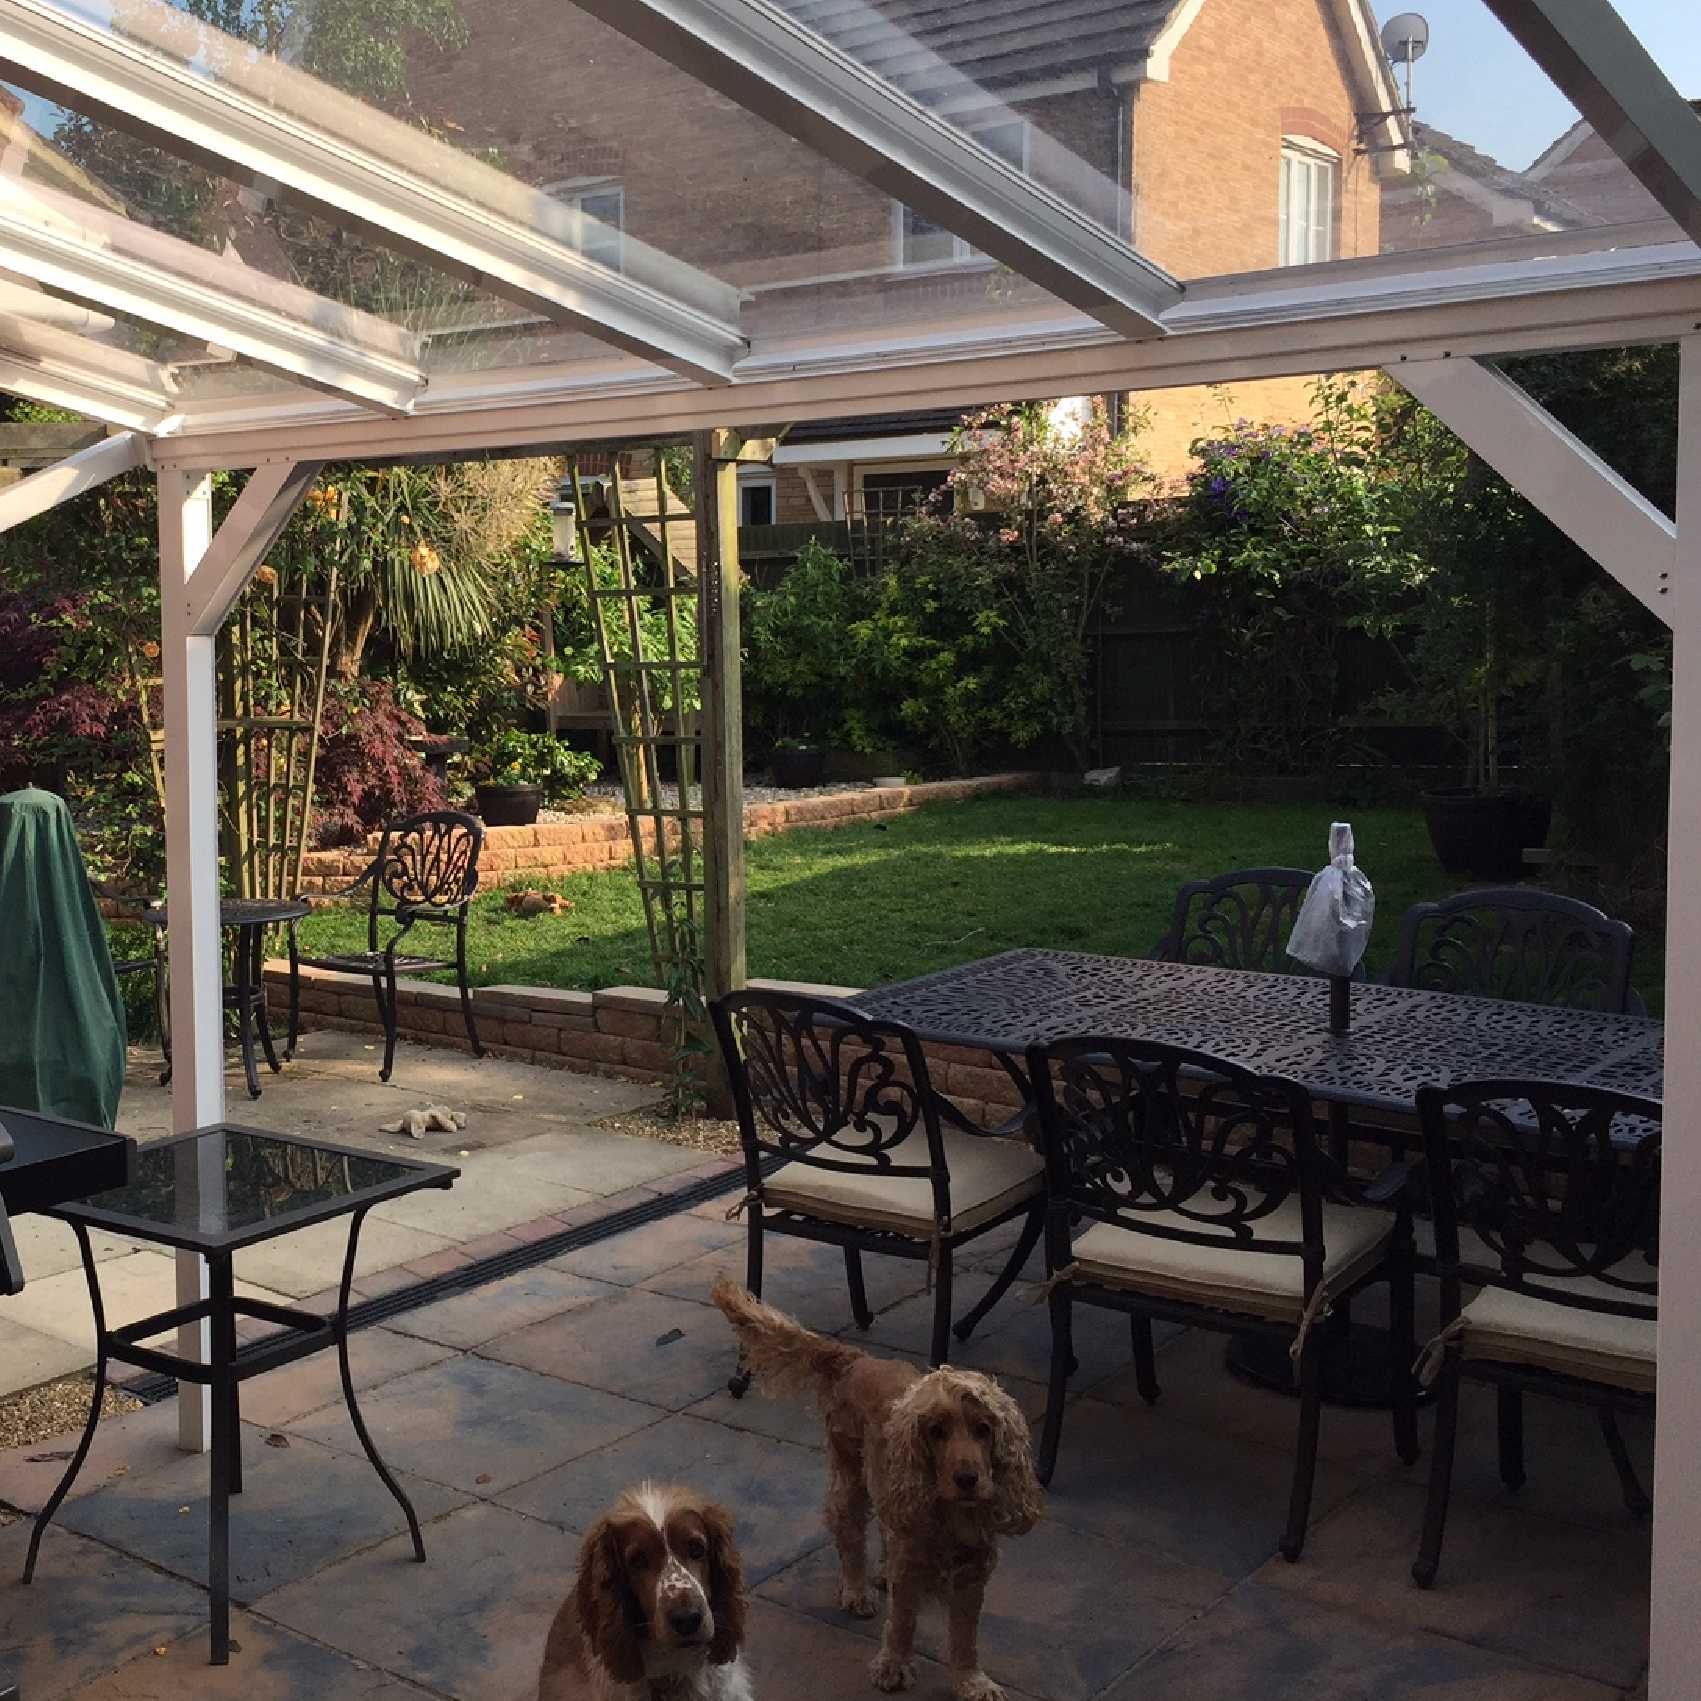 Affordable Omega Smart Lean-To Canopy, White UNGLAZED for 6mm Glazing - 7.0m (W) x 2.5m (P), (4) Supporting Posts